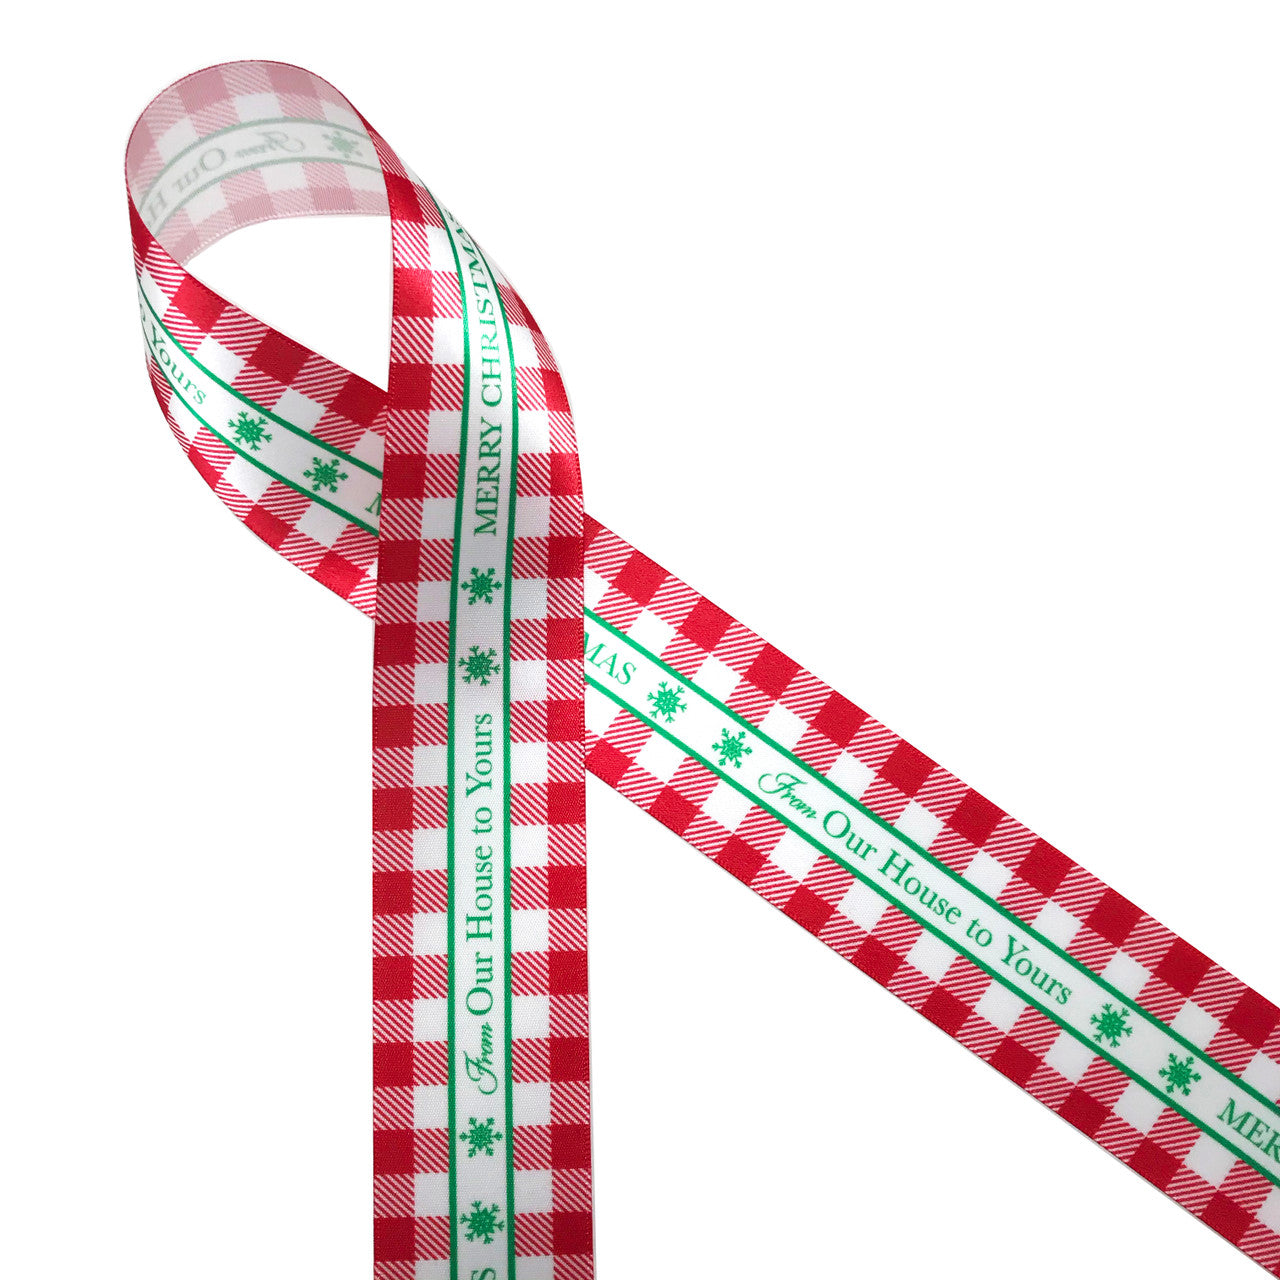 Gingham check in red on 5/8 white single face satin ribbon